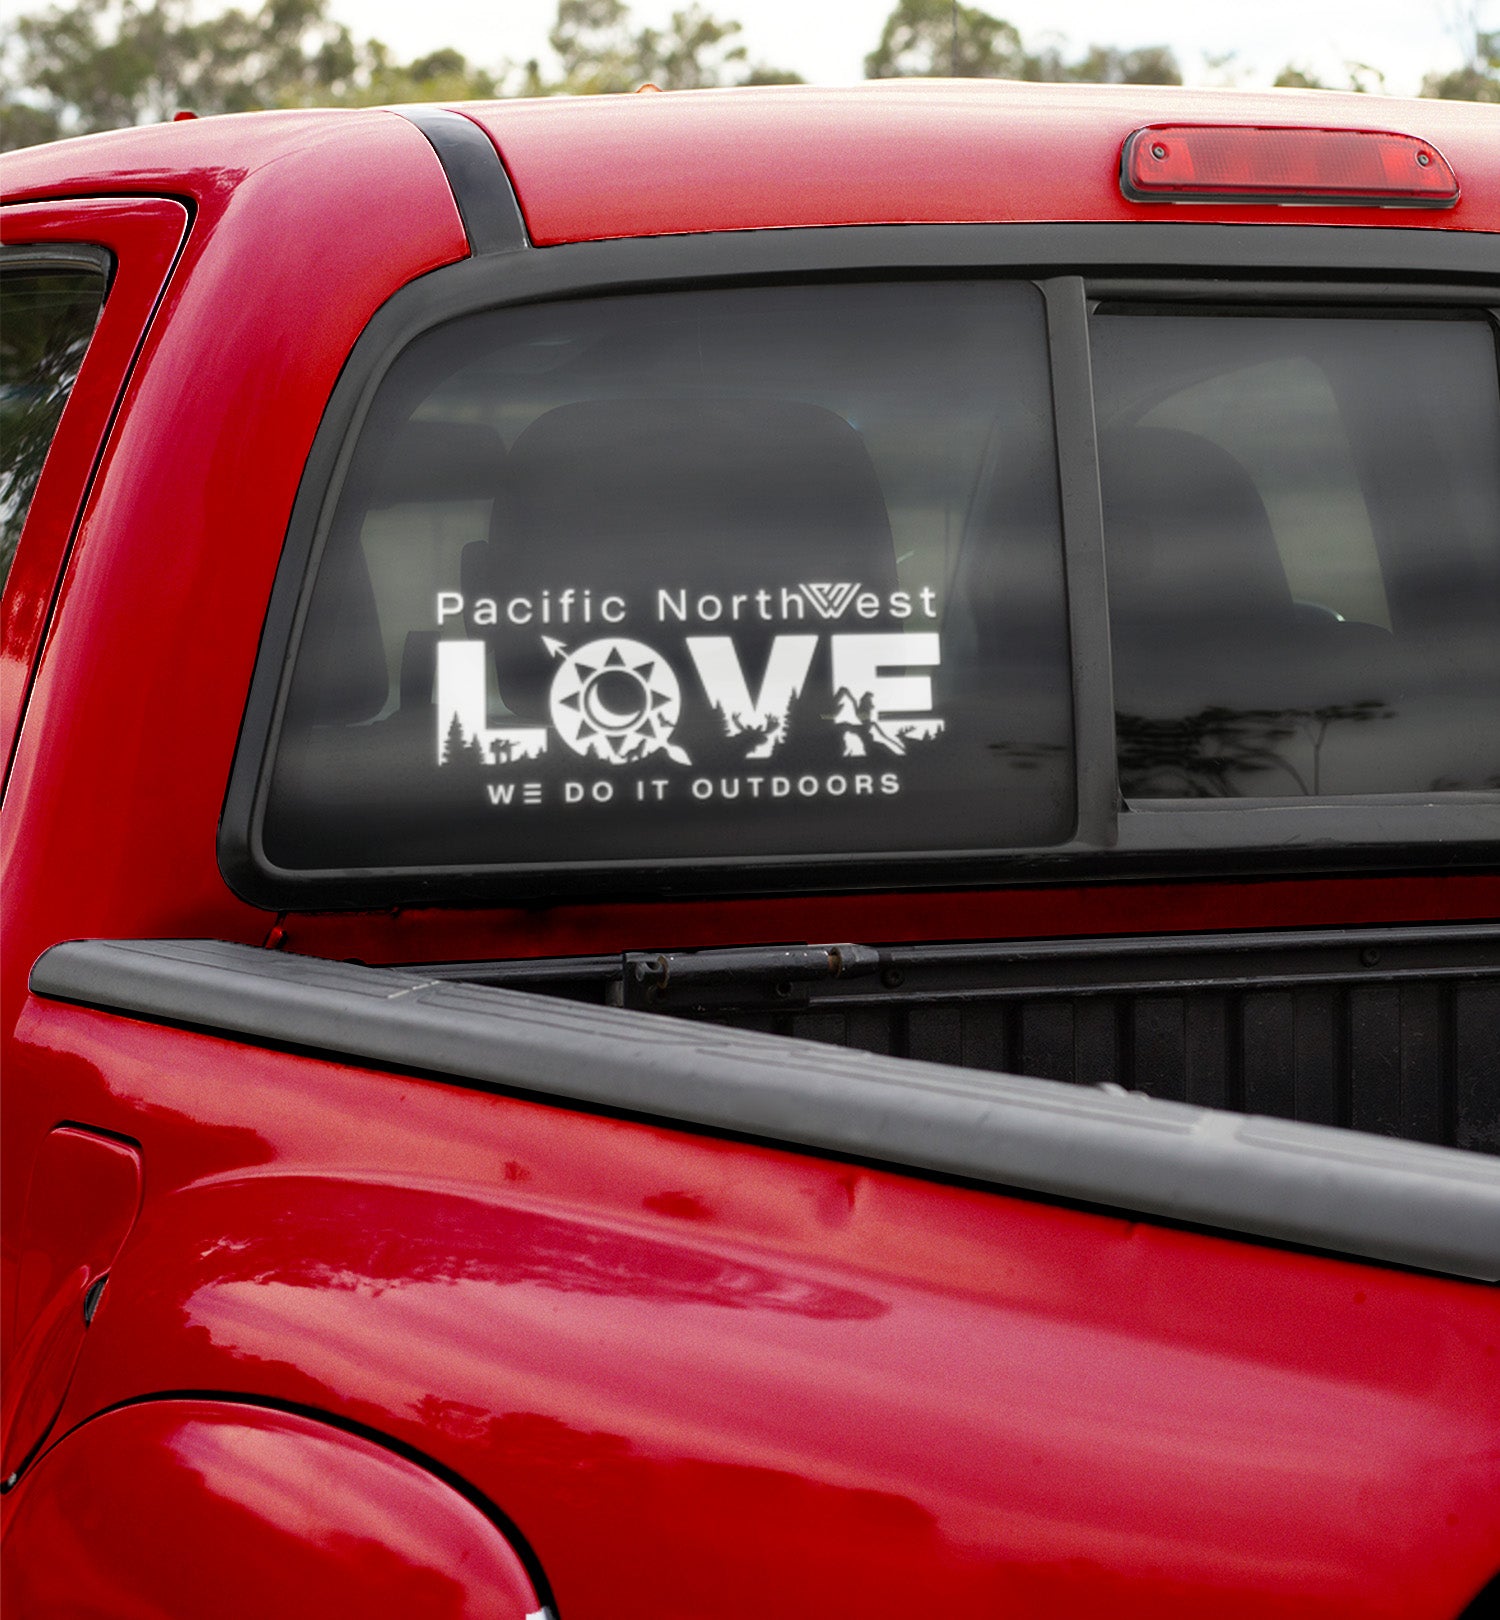 Pacific Northwest LOVE Decal - Lifestyle